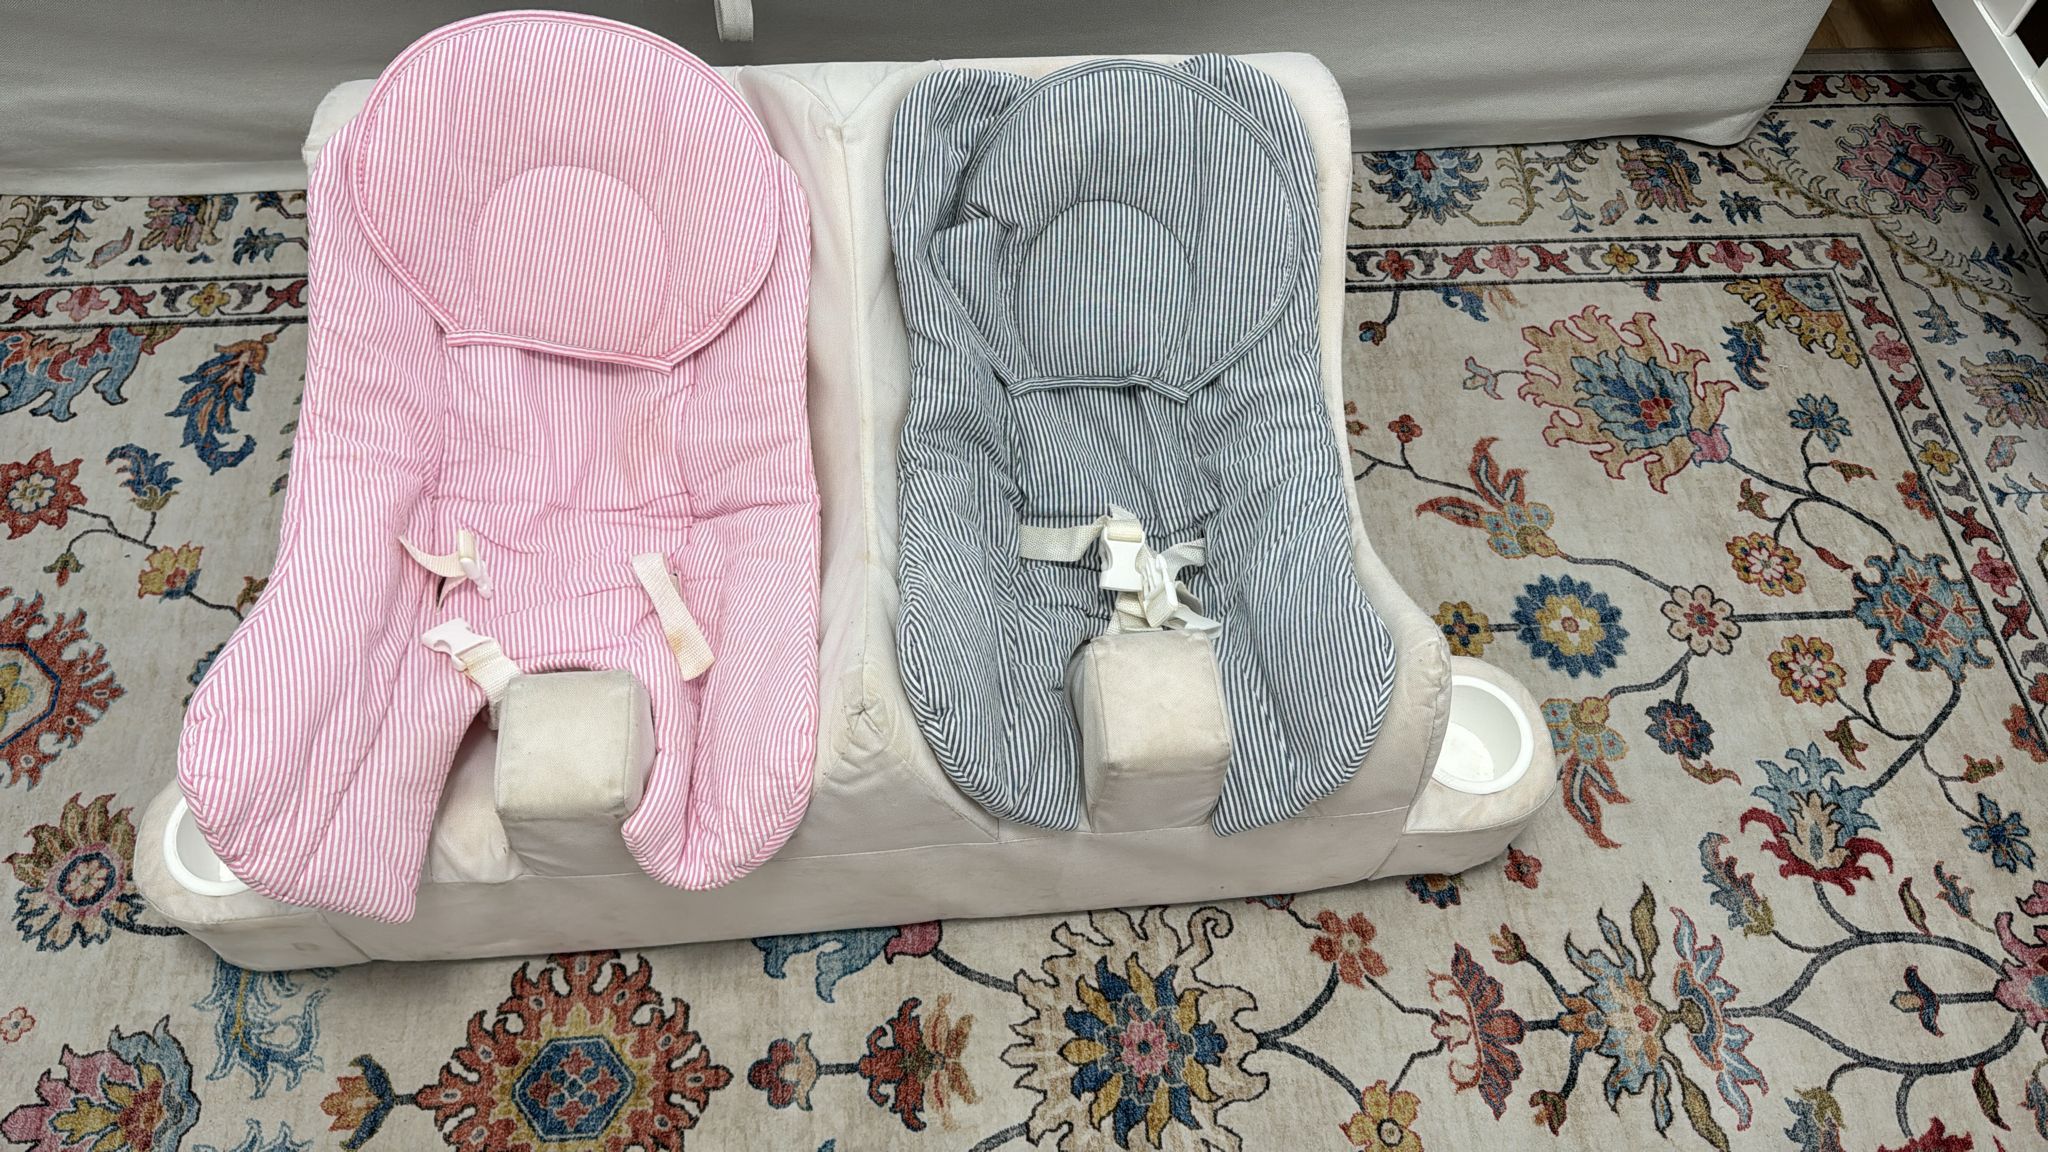 Baby Chair: Table For Two